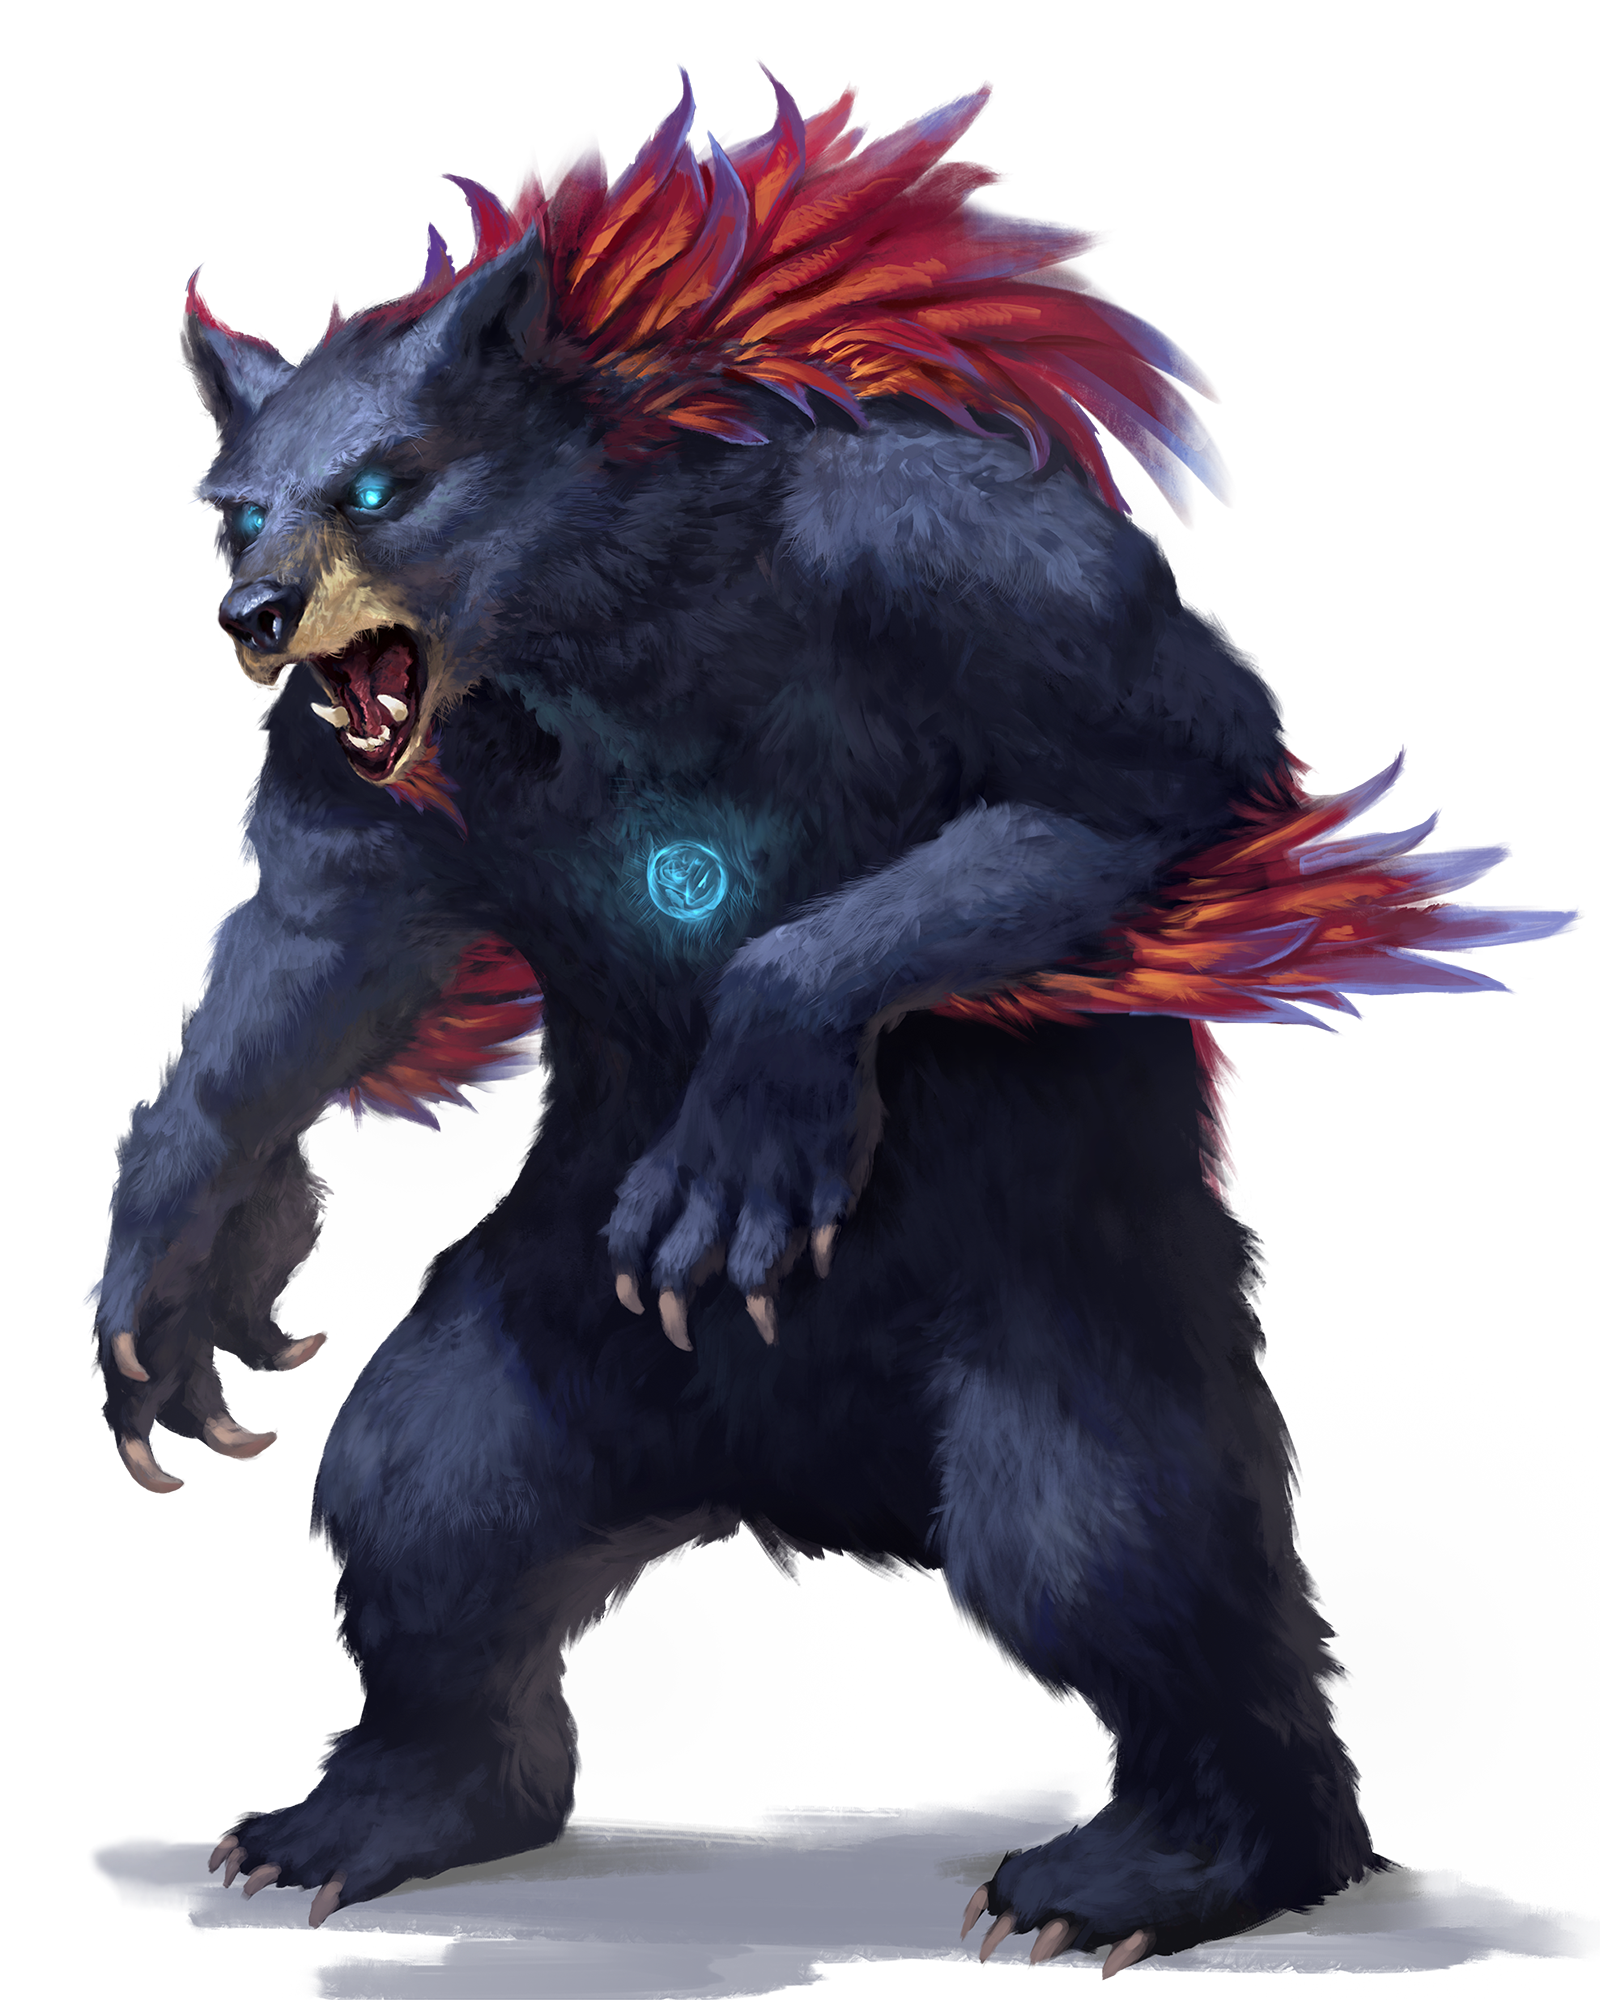 Dolok Darkfur a large, blue eyed, dark furred bear with red and orange feathers growing from its back and arms